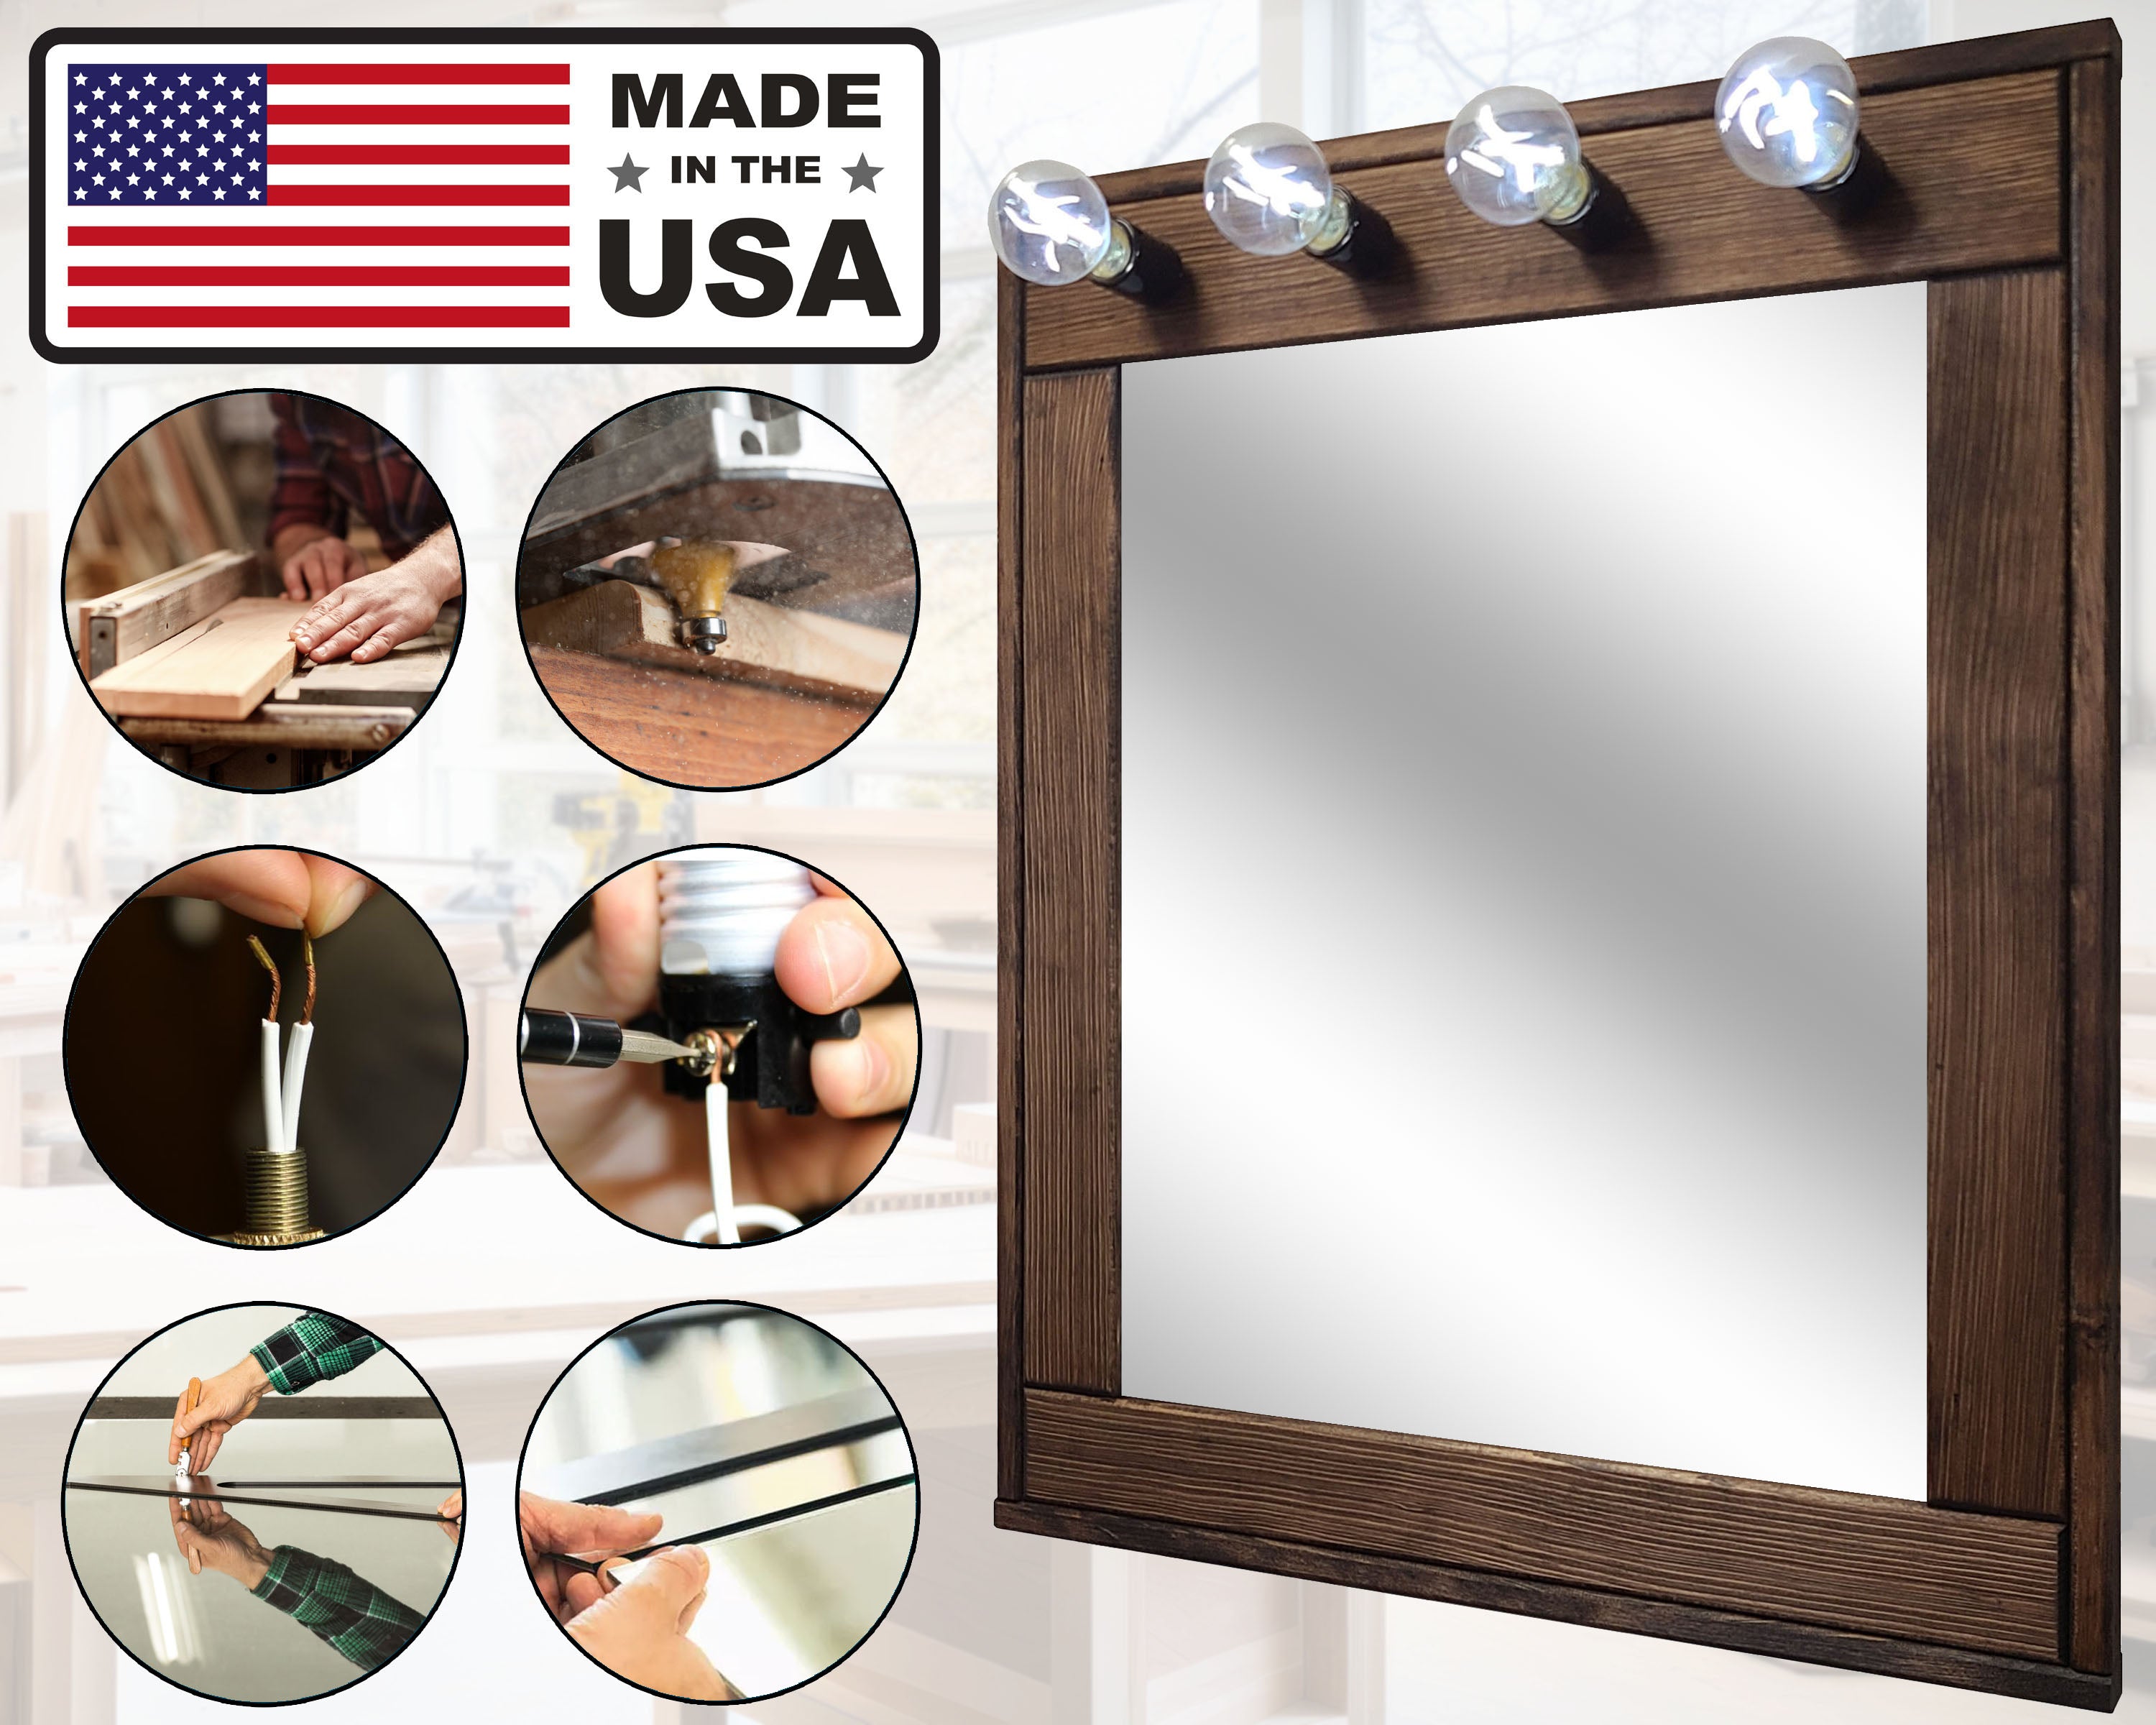 Rustic Hollywood Mirror with Lights - Custom Stain Colors - Makeup Vanity Mirror